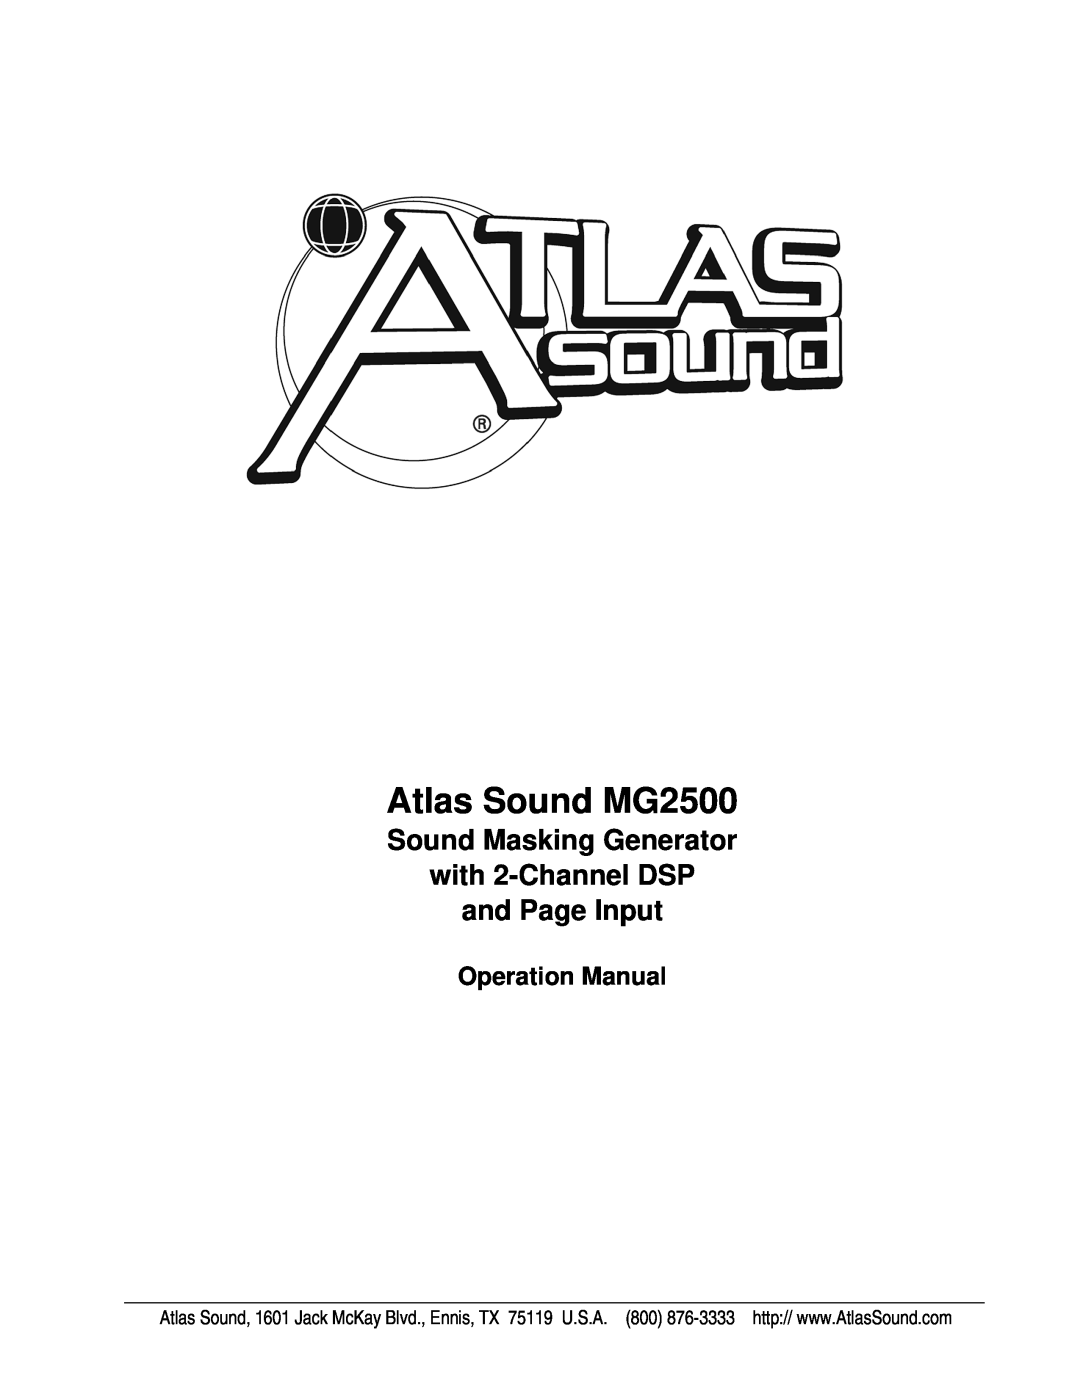 Atlas Sound operation manual Atlas Sound MG2500, Sound Masking Generator with 2-ChannelDSP, and Page Input 